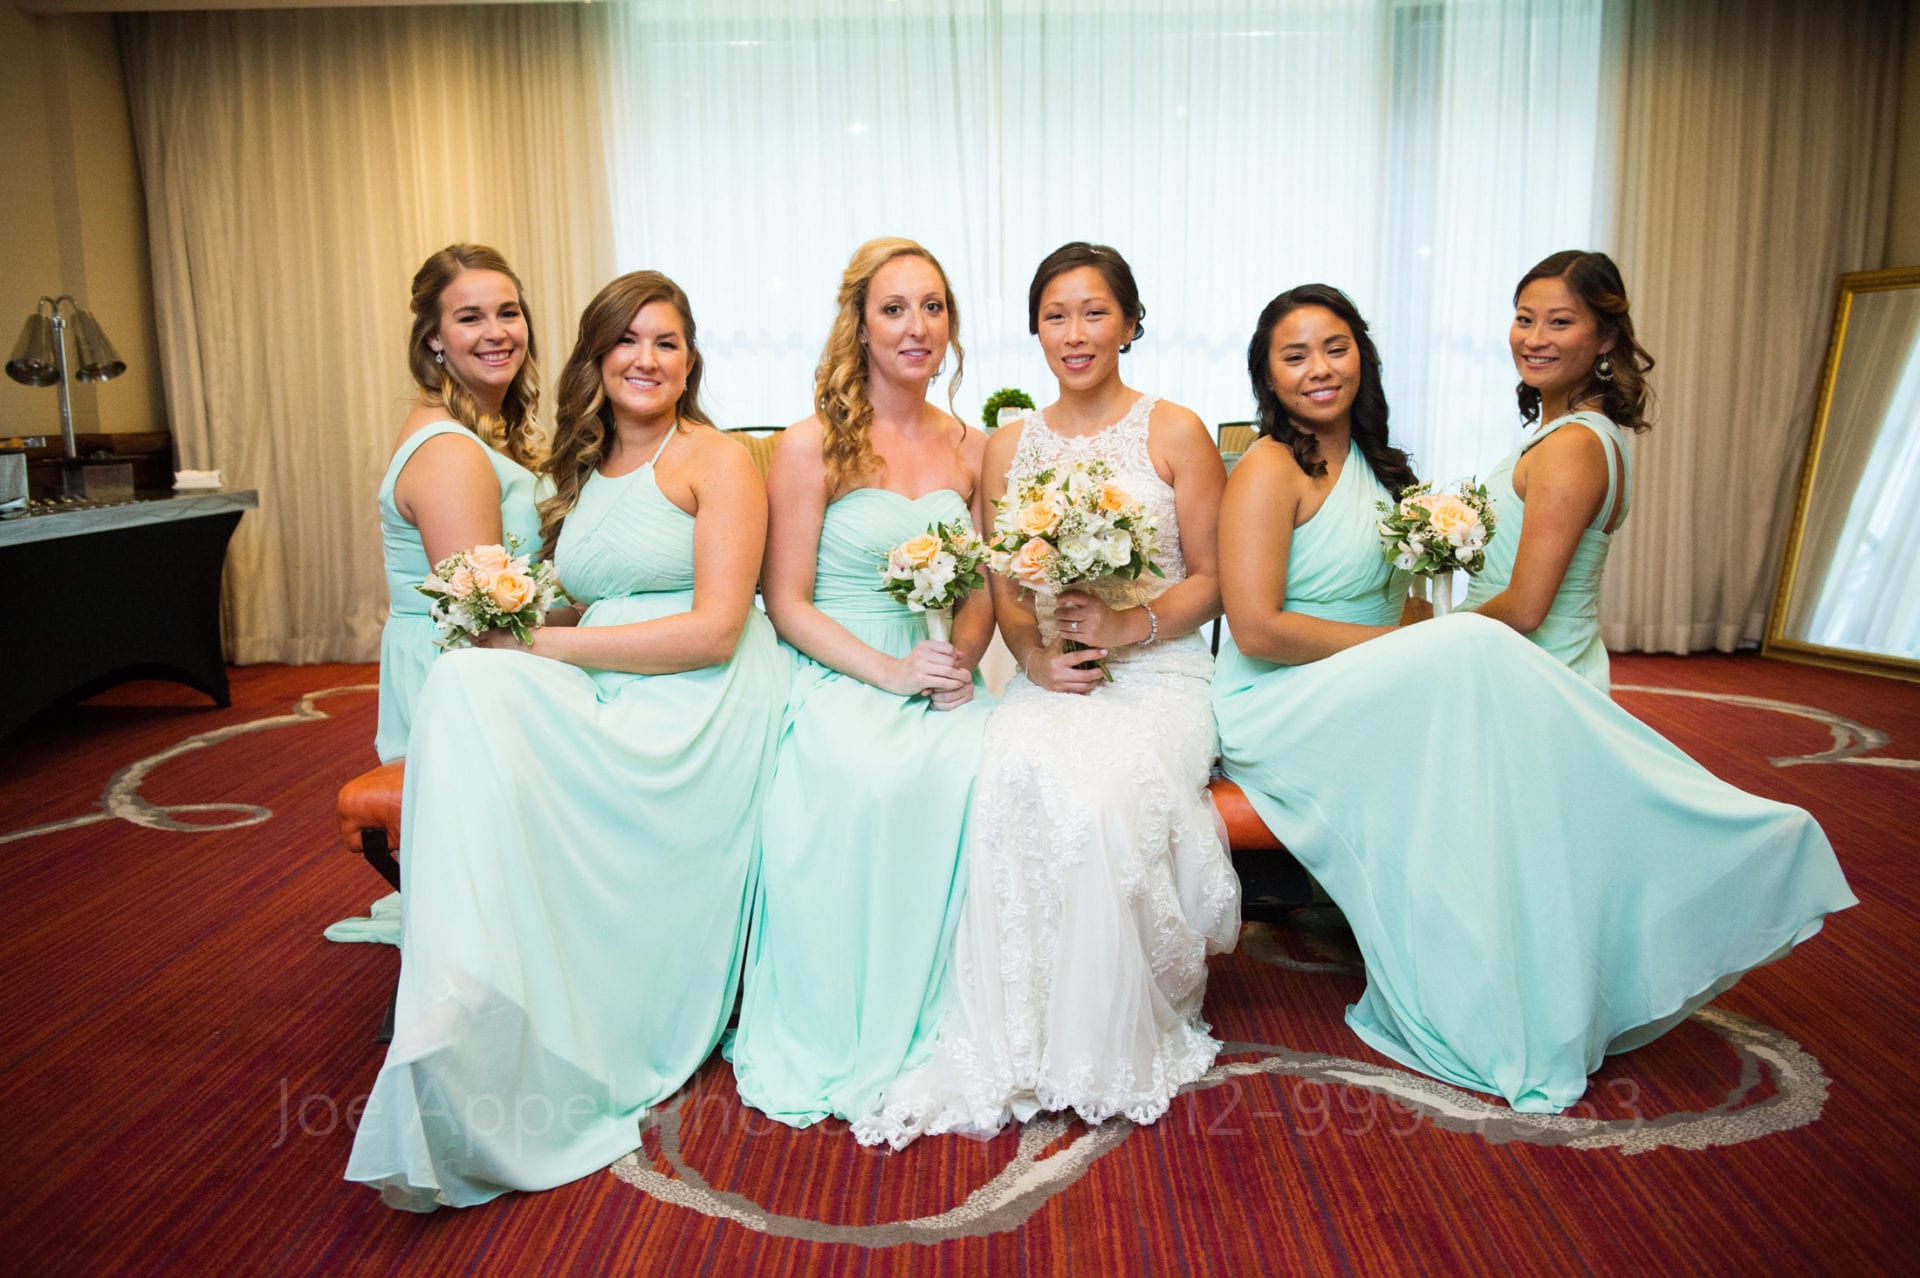 bridesmaids wearing aqua dresses and holding orange bouquets sit on a couch with the bride